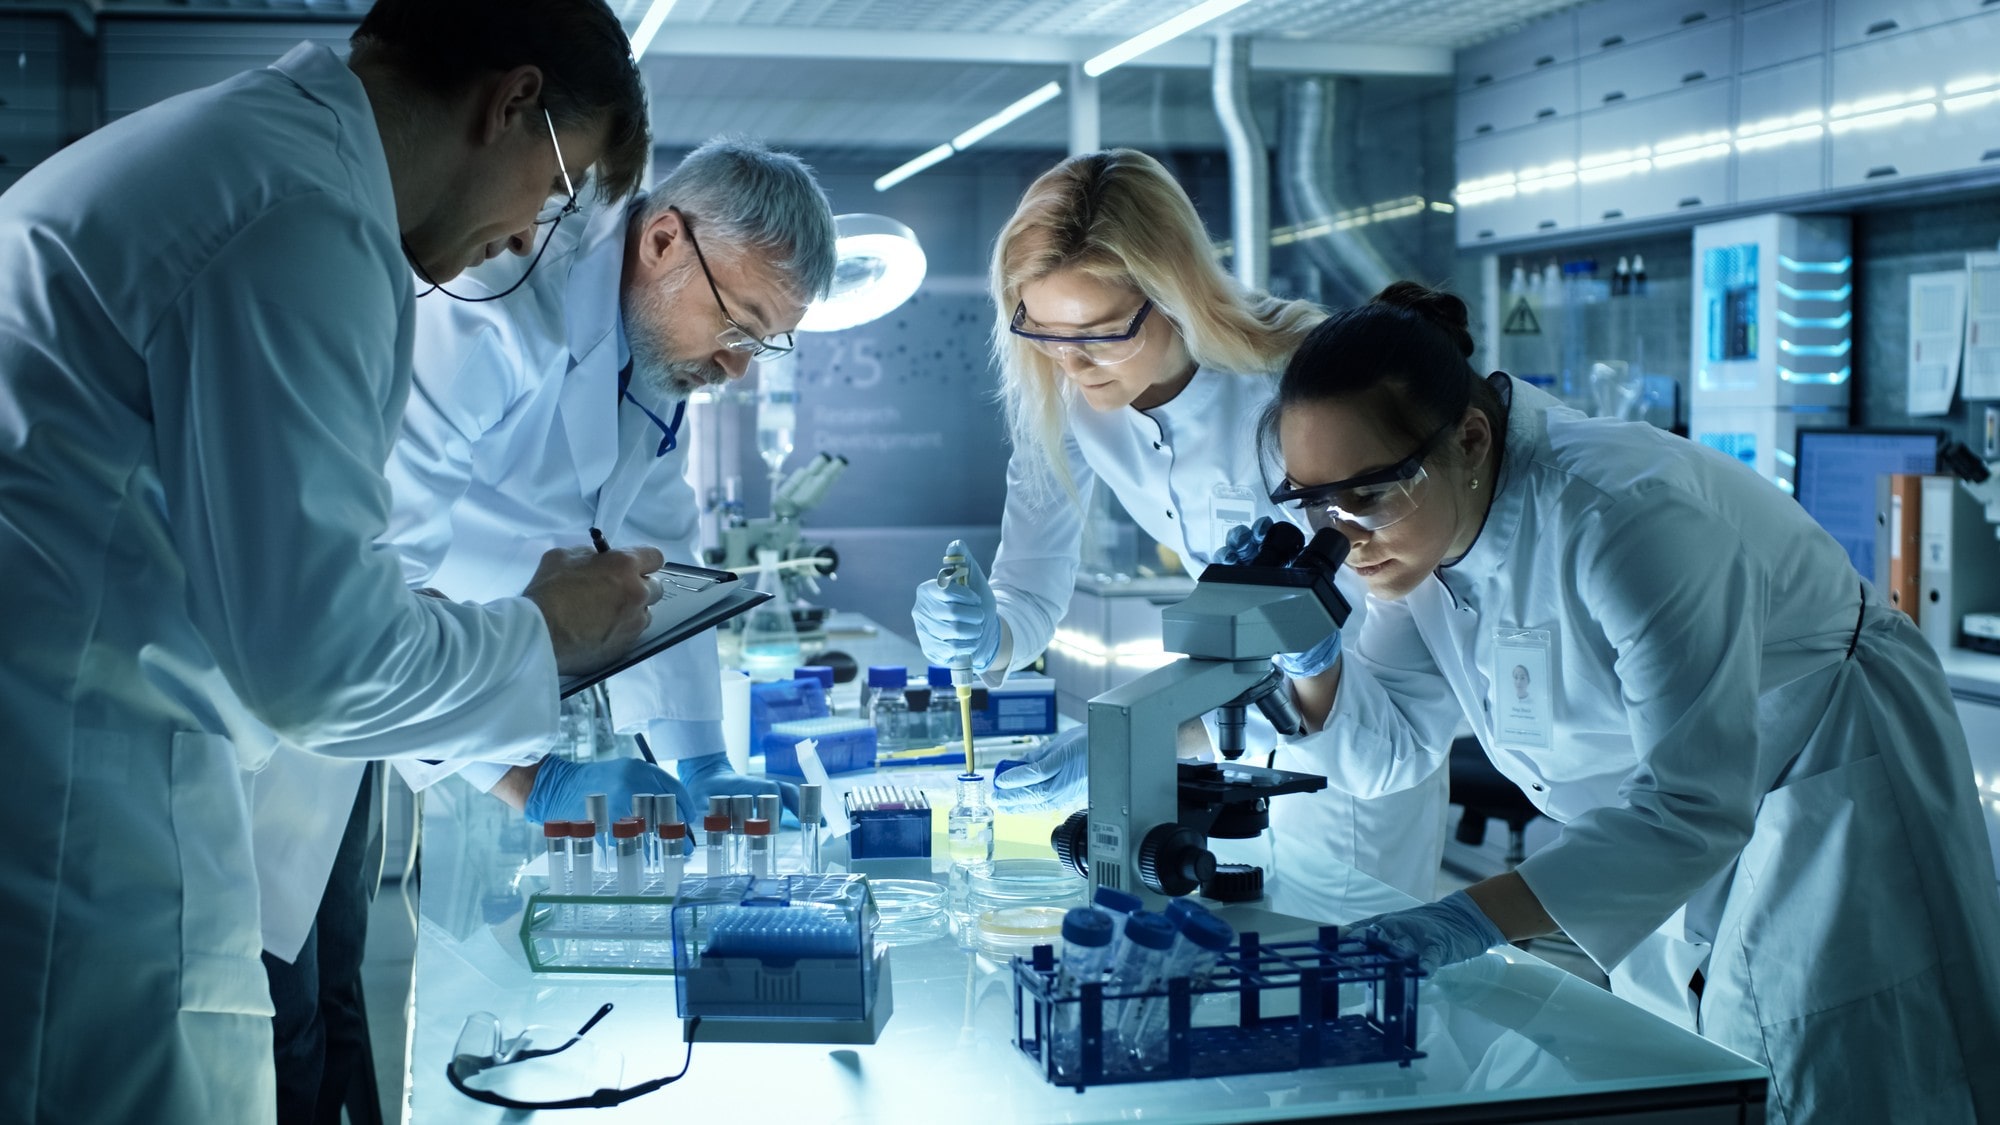 A Group Of People In Lab Coats Looking at A Microscope